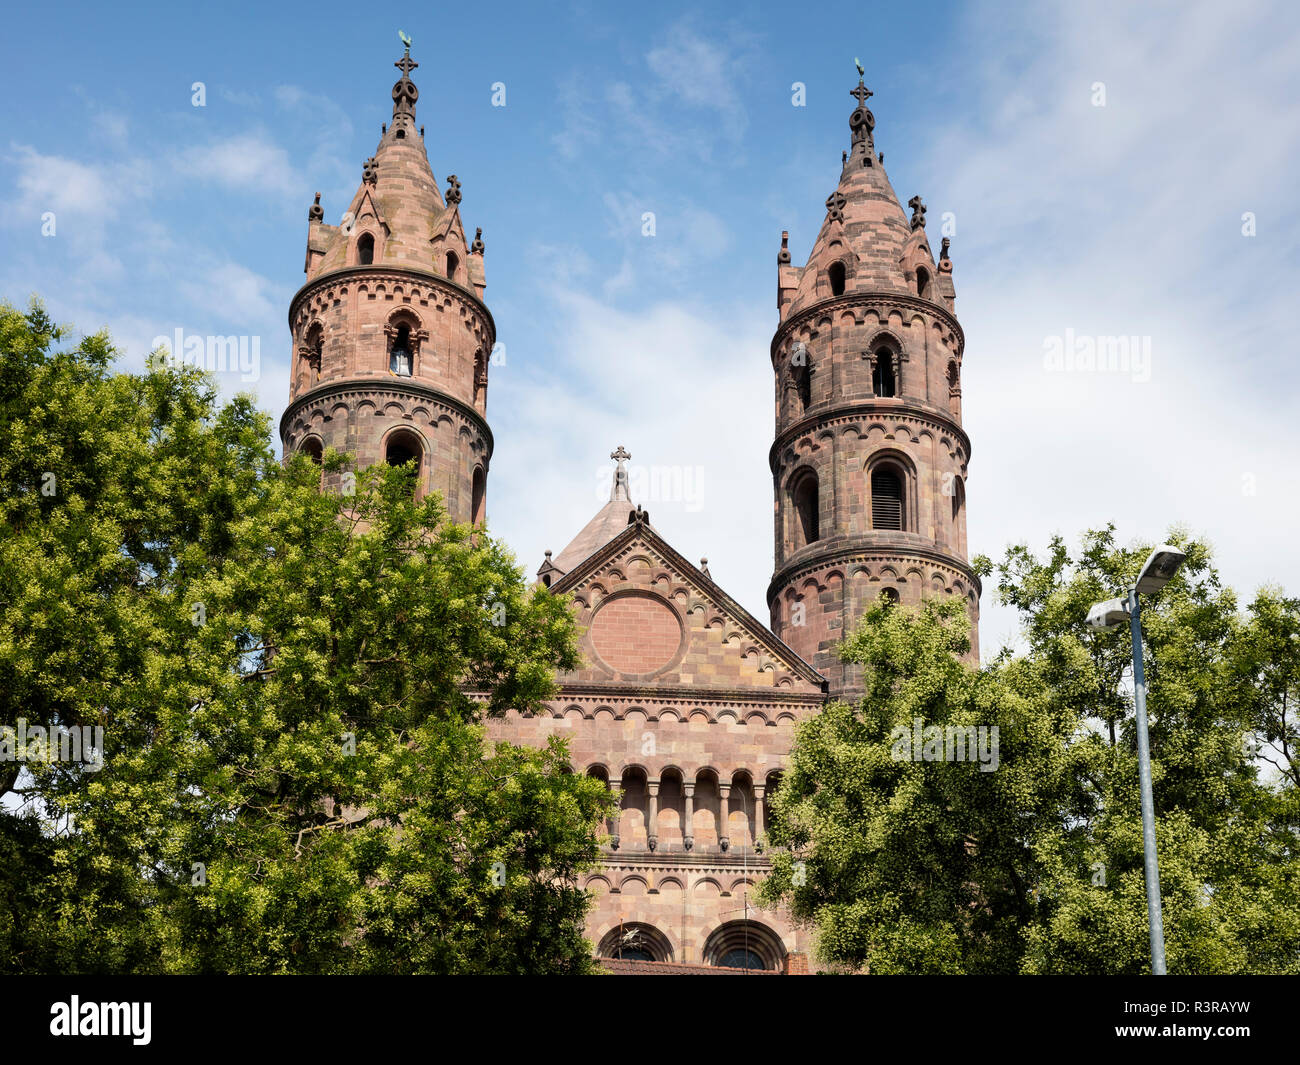 Germany, Rhineland-Palatinate, Worms, Cathedral of Saint Peter Stock Photo